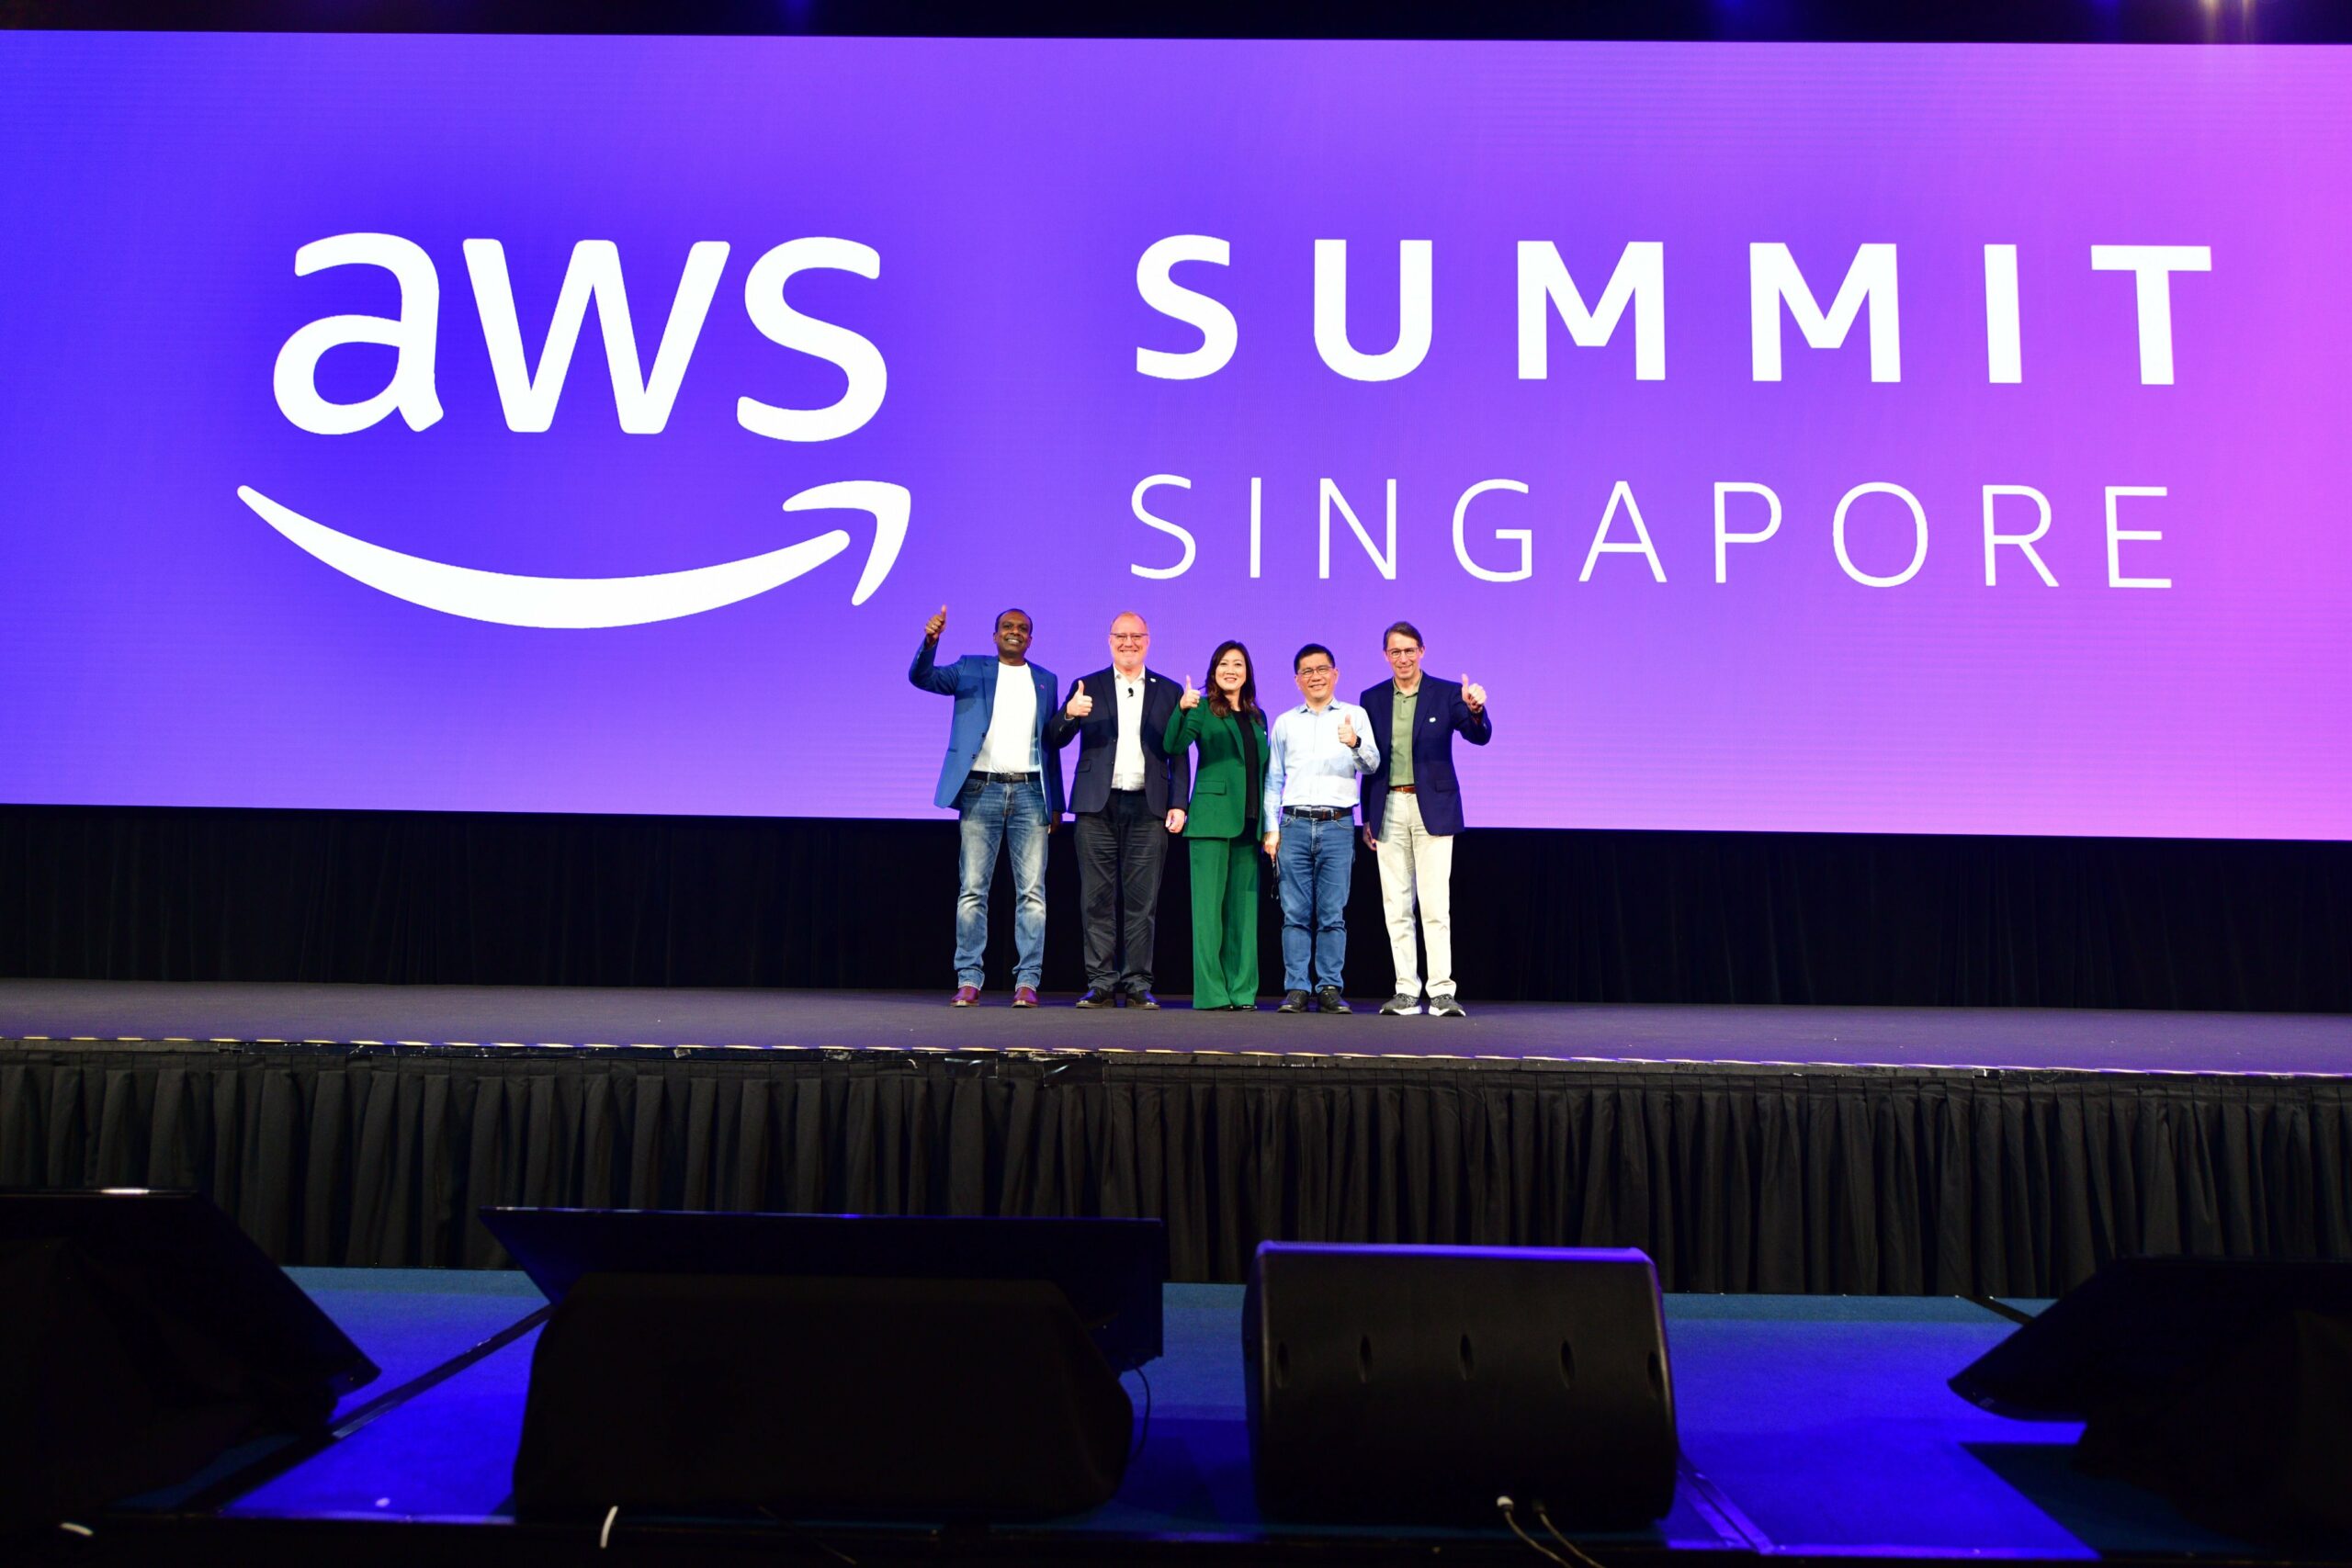 AWS has invested US6.5 billion in Singapore since the launch of its